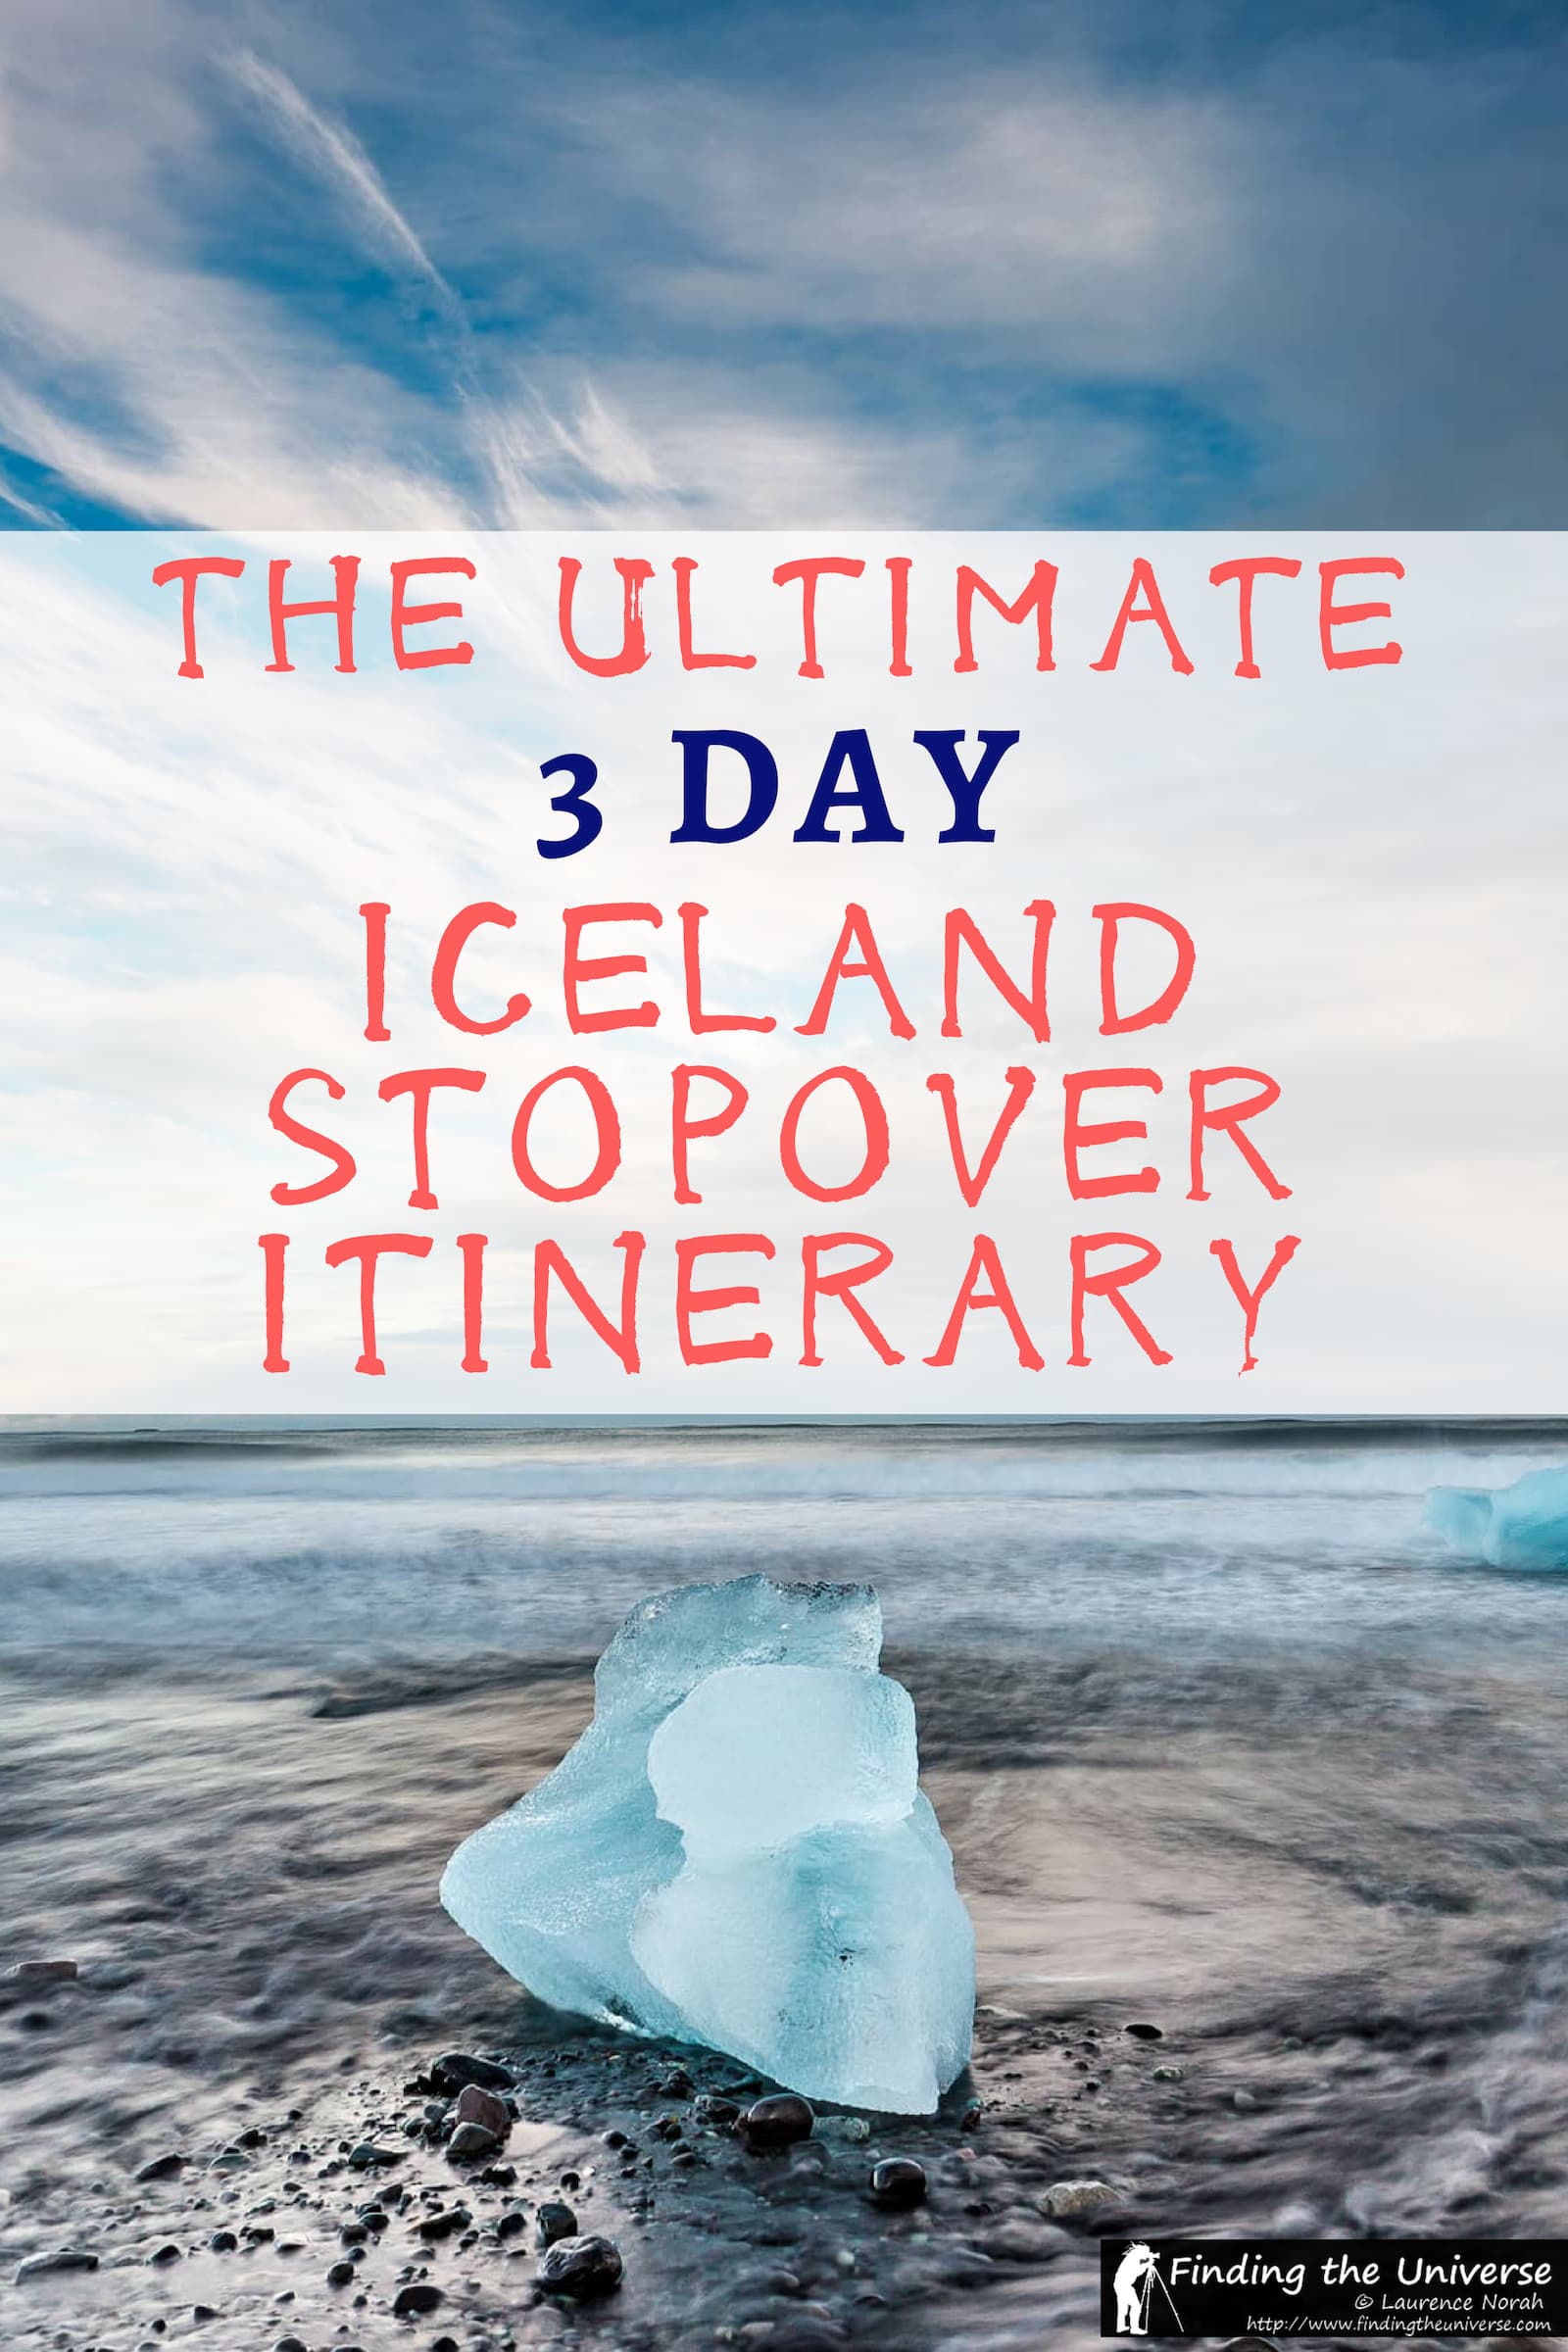 A detailed guide to spending 3 days in Iceland on a stopover. Including a 3 day self drive Iceland itinerary, as well as day and group trips suggestions!